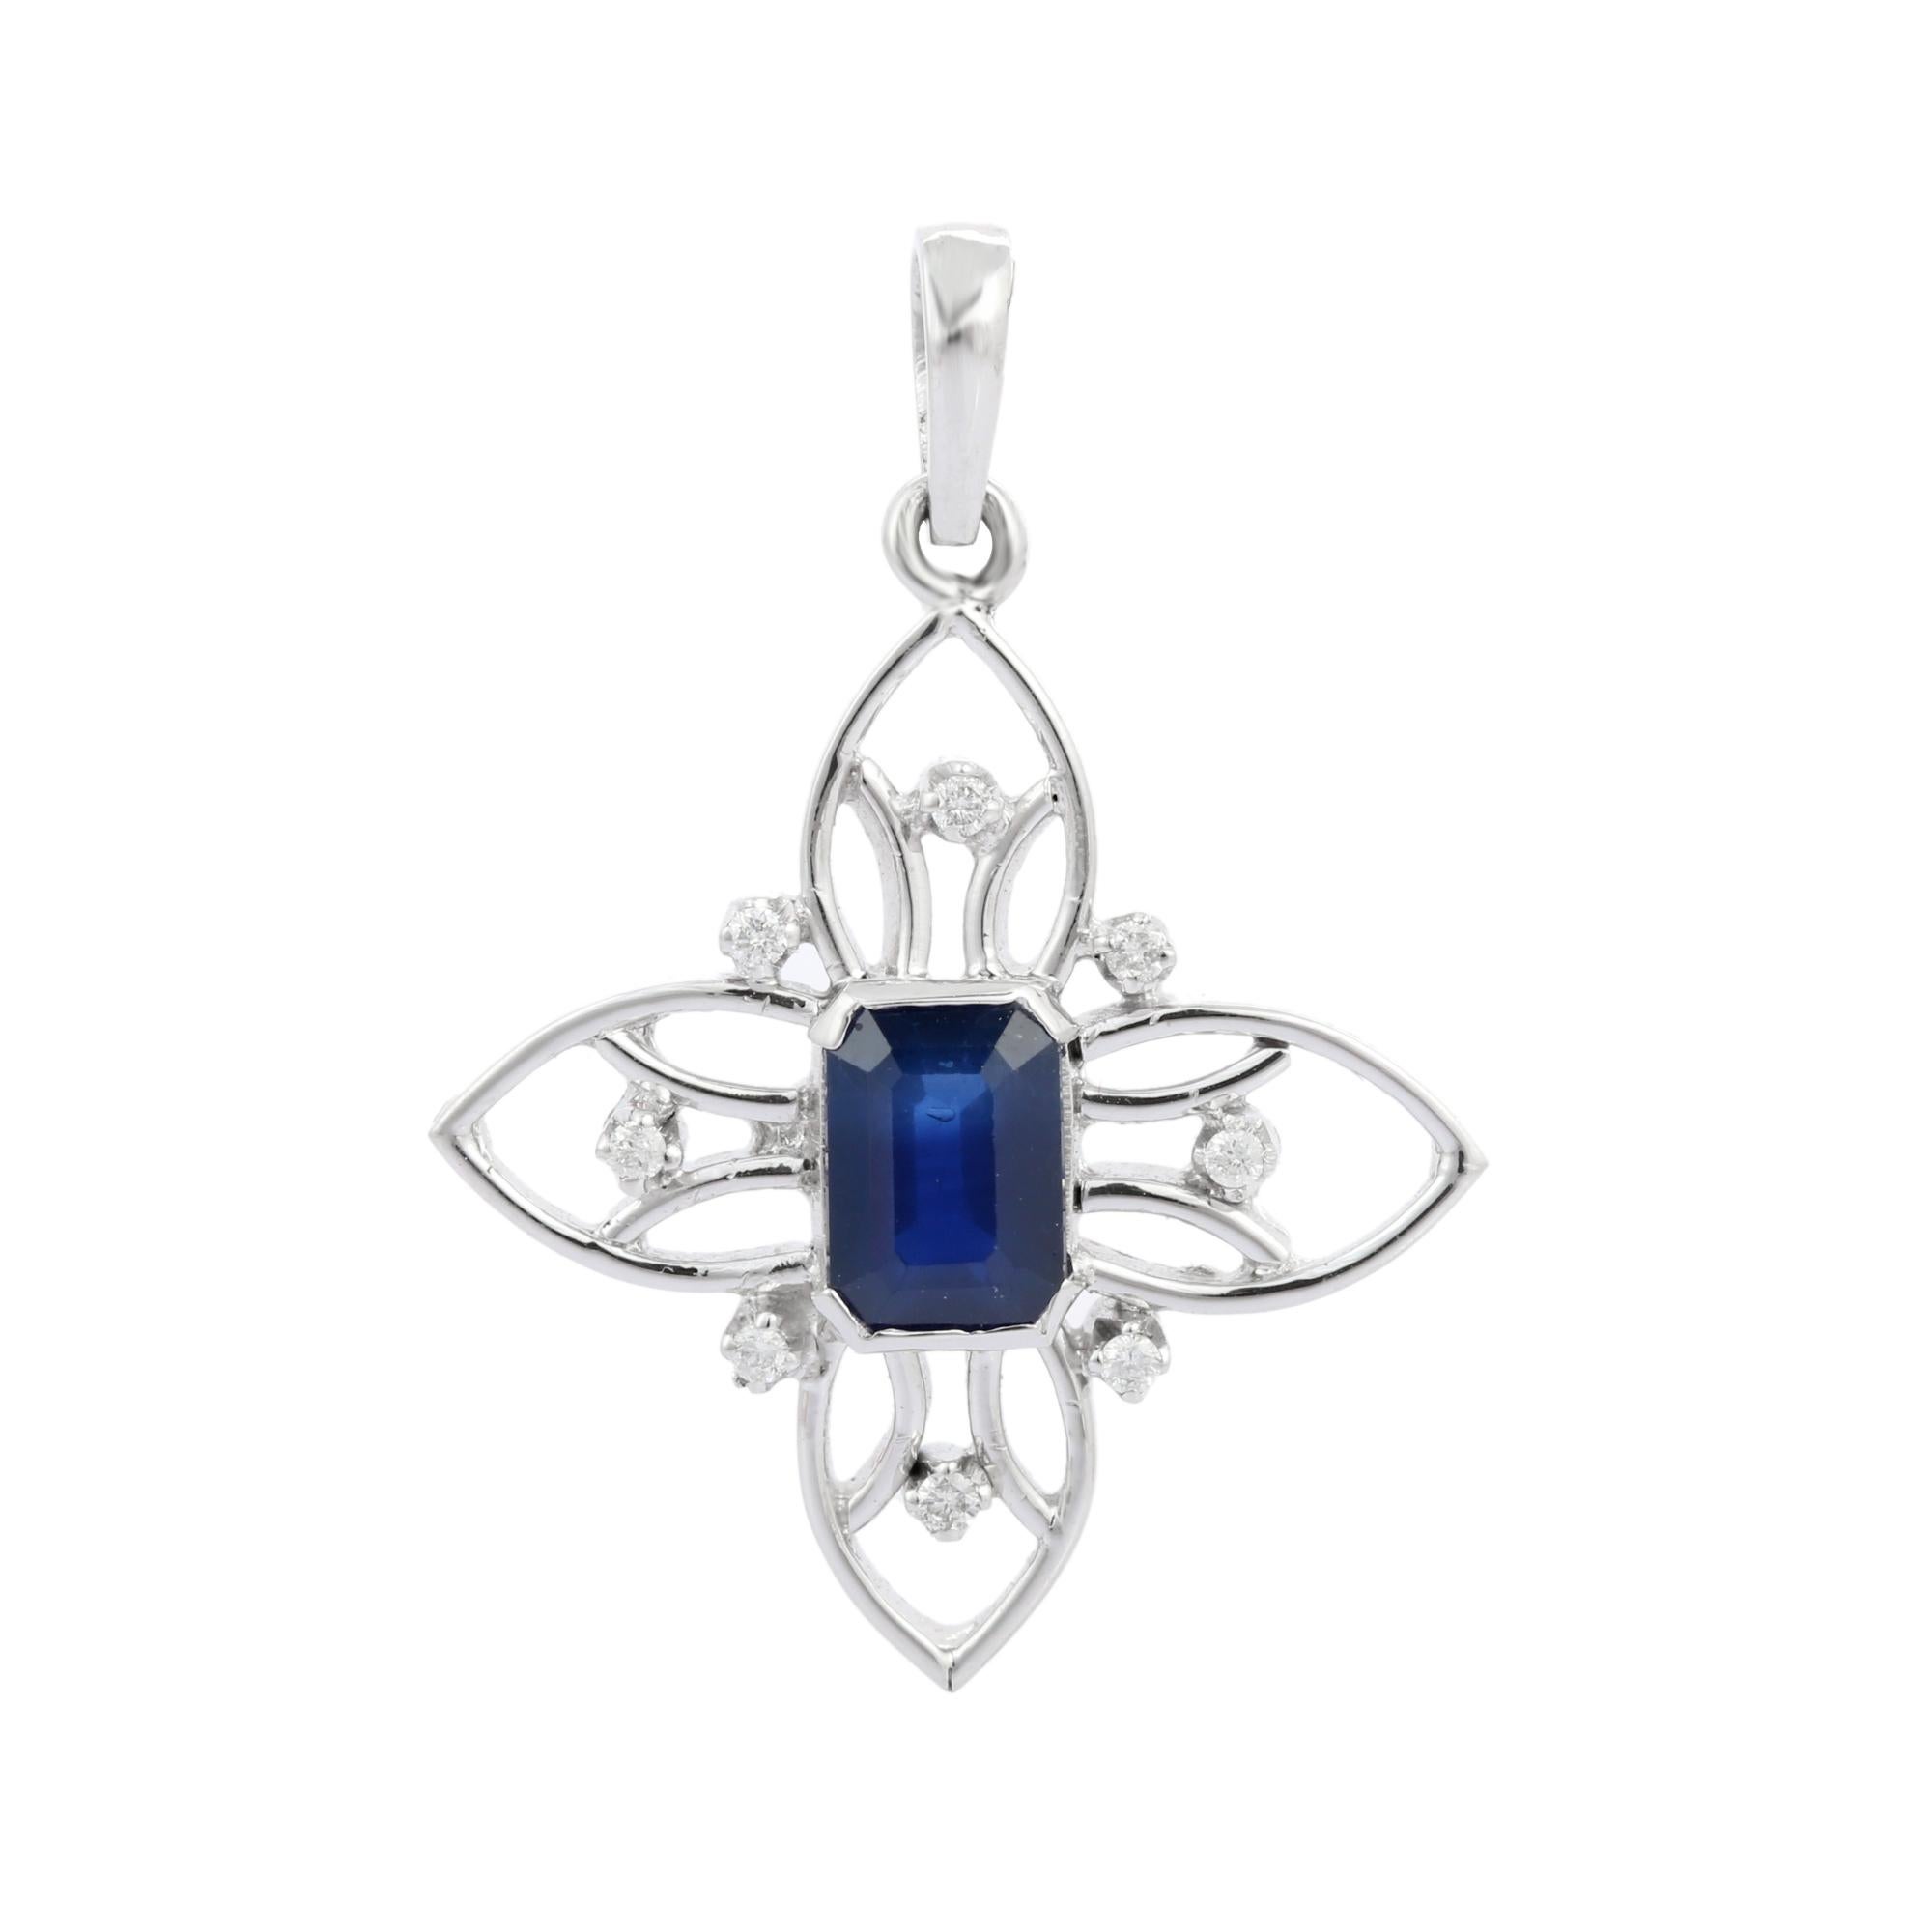 Natural Blue Sapphire pendant in 18K Gold. It has a octagon cut sapphire studded diamonds that completes your look with a decent touch. Pendants are used to wear or gifted to represent love and promises. It's an attractive jewelry piece that goes